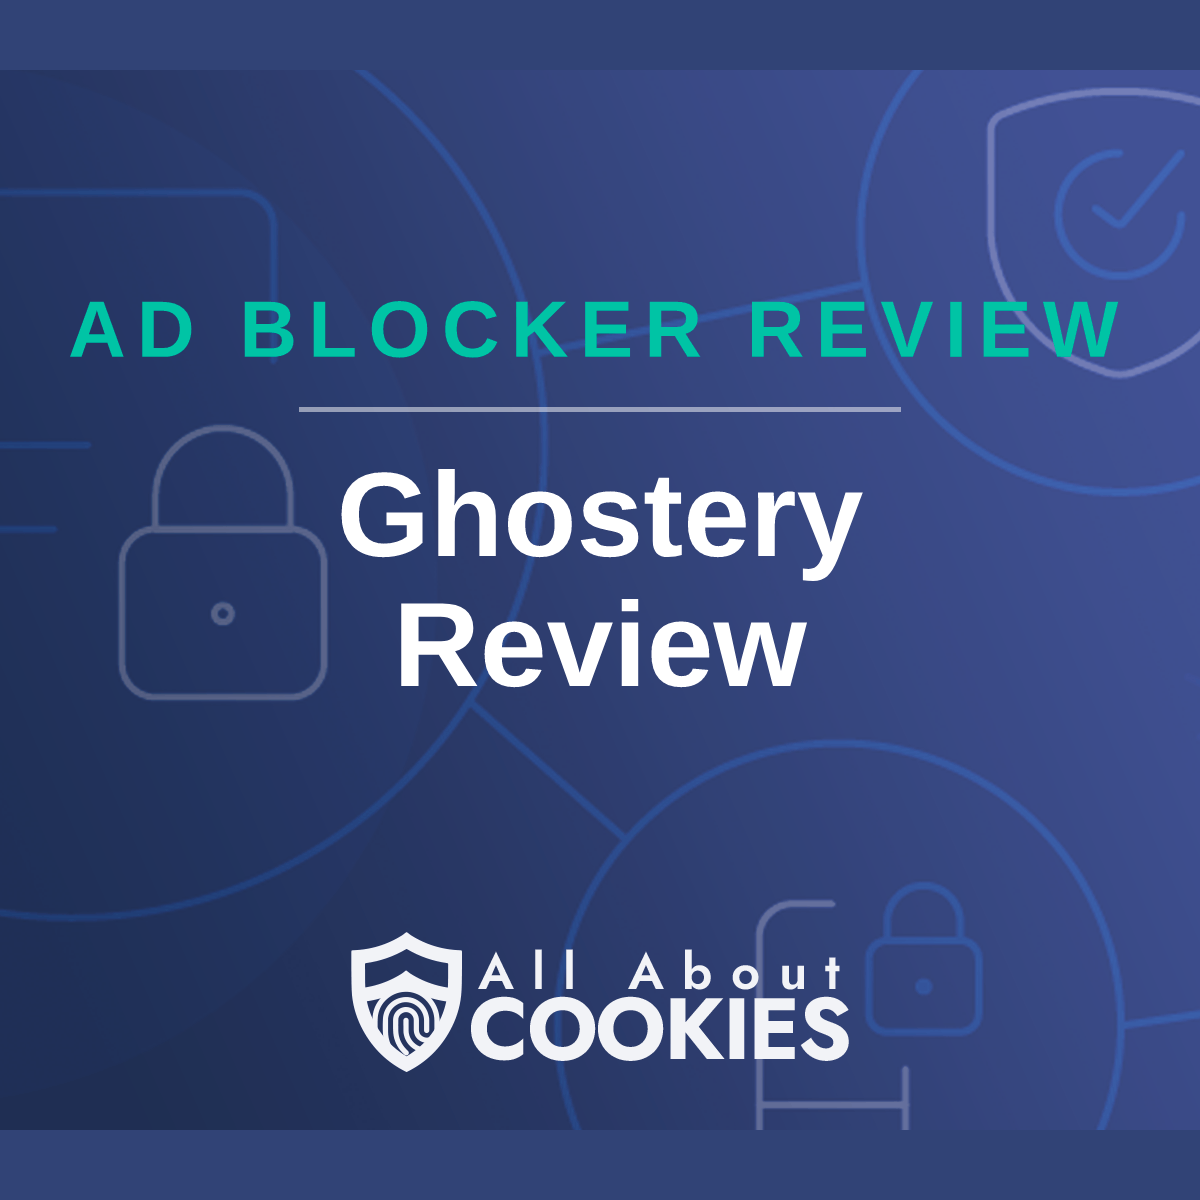 A blue background with images of locks and shields with the text &quot;Ghostery Review&quot; and the All About Cookies logo. 